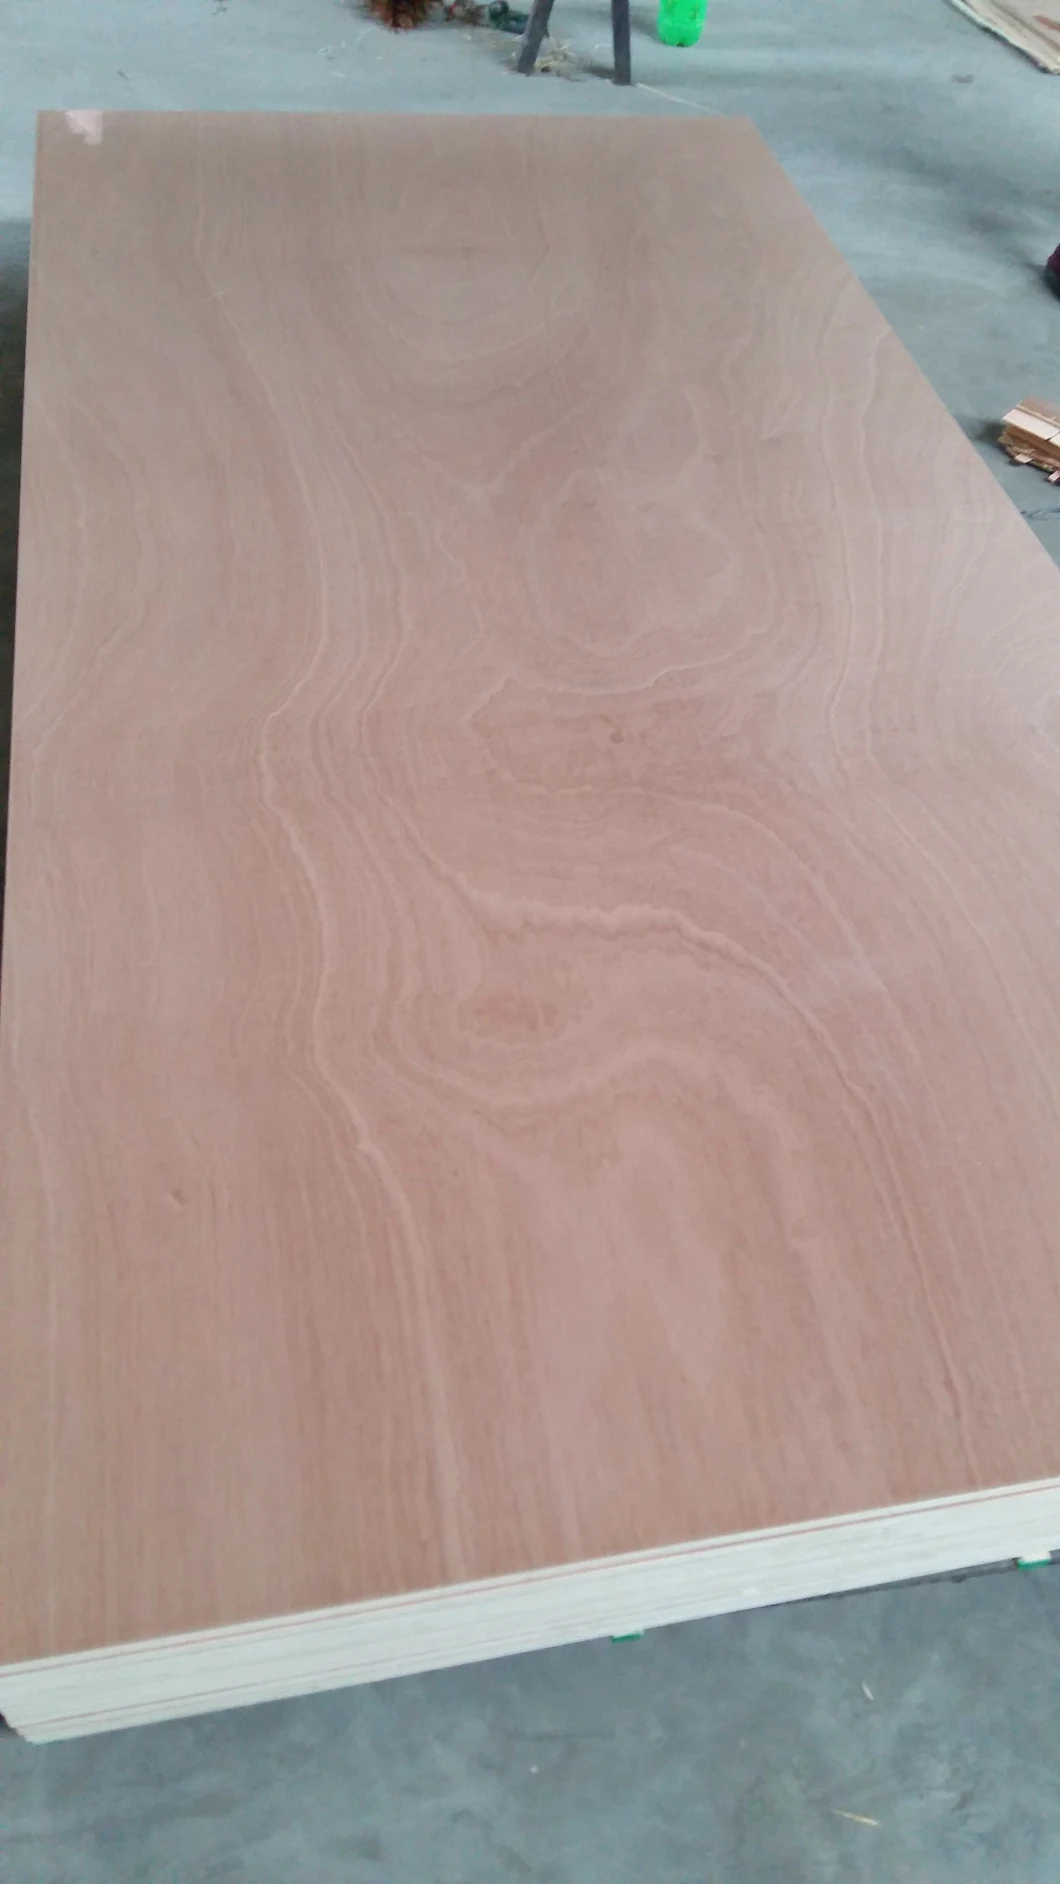 Factory-2.7mm Red Hardwood Face/Caobilla Plywood Sheets Sales in Mexico